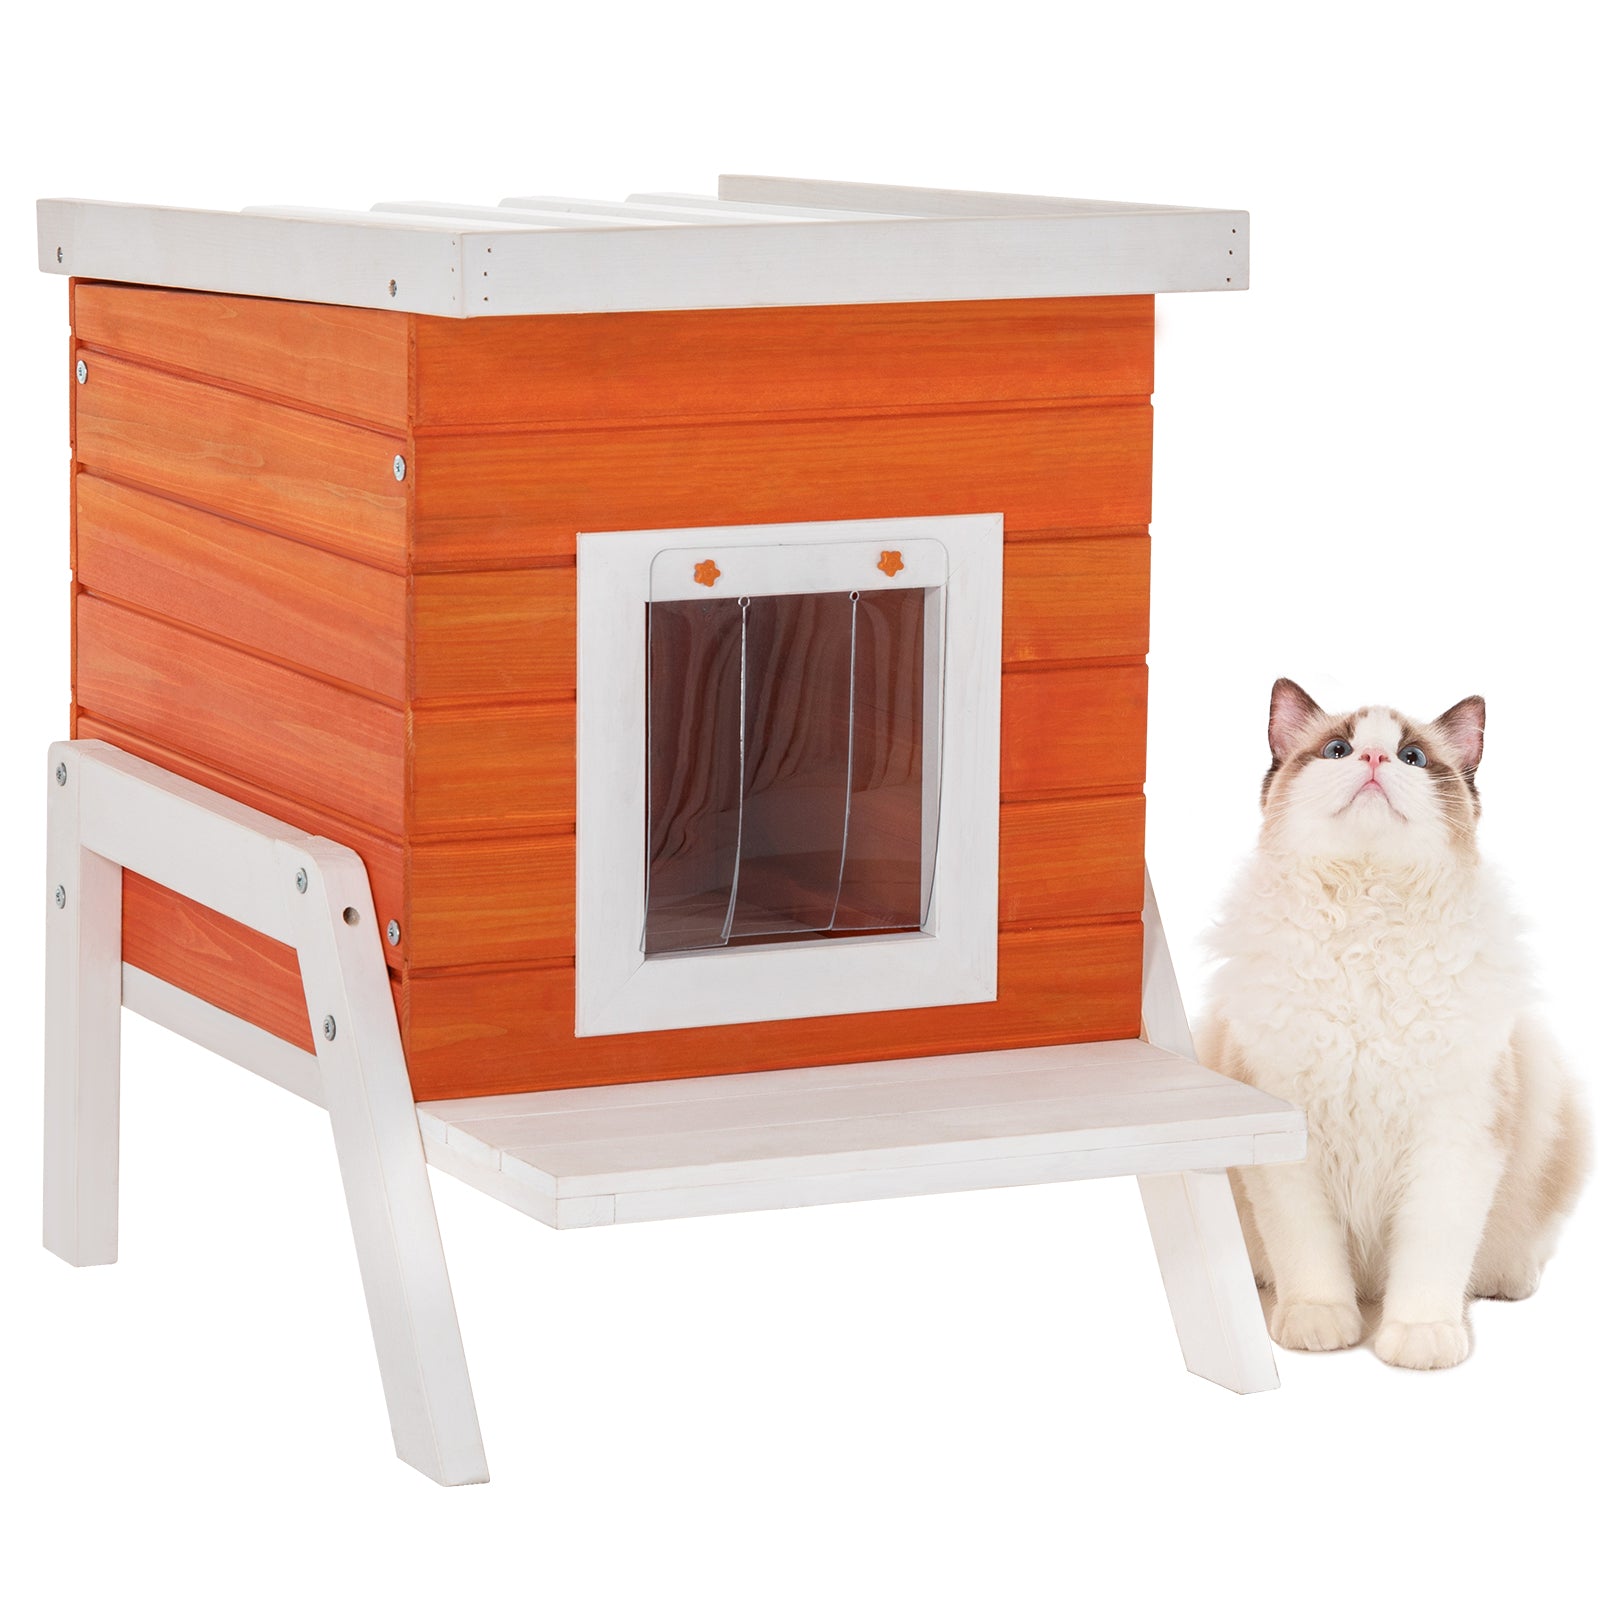 petsfit-cat-house-outdoor-insulated-high-feet-feeding-station-door-curtain-wood-outside-cat-house-bunny-rabbit-hutch-orange-01